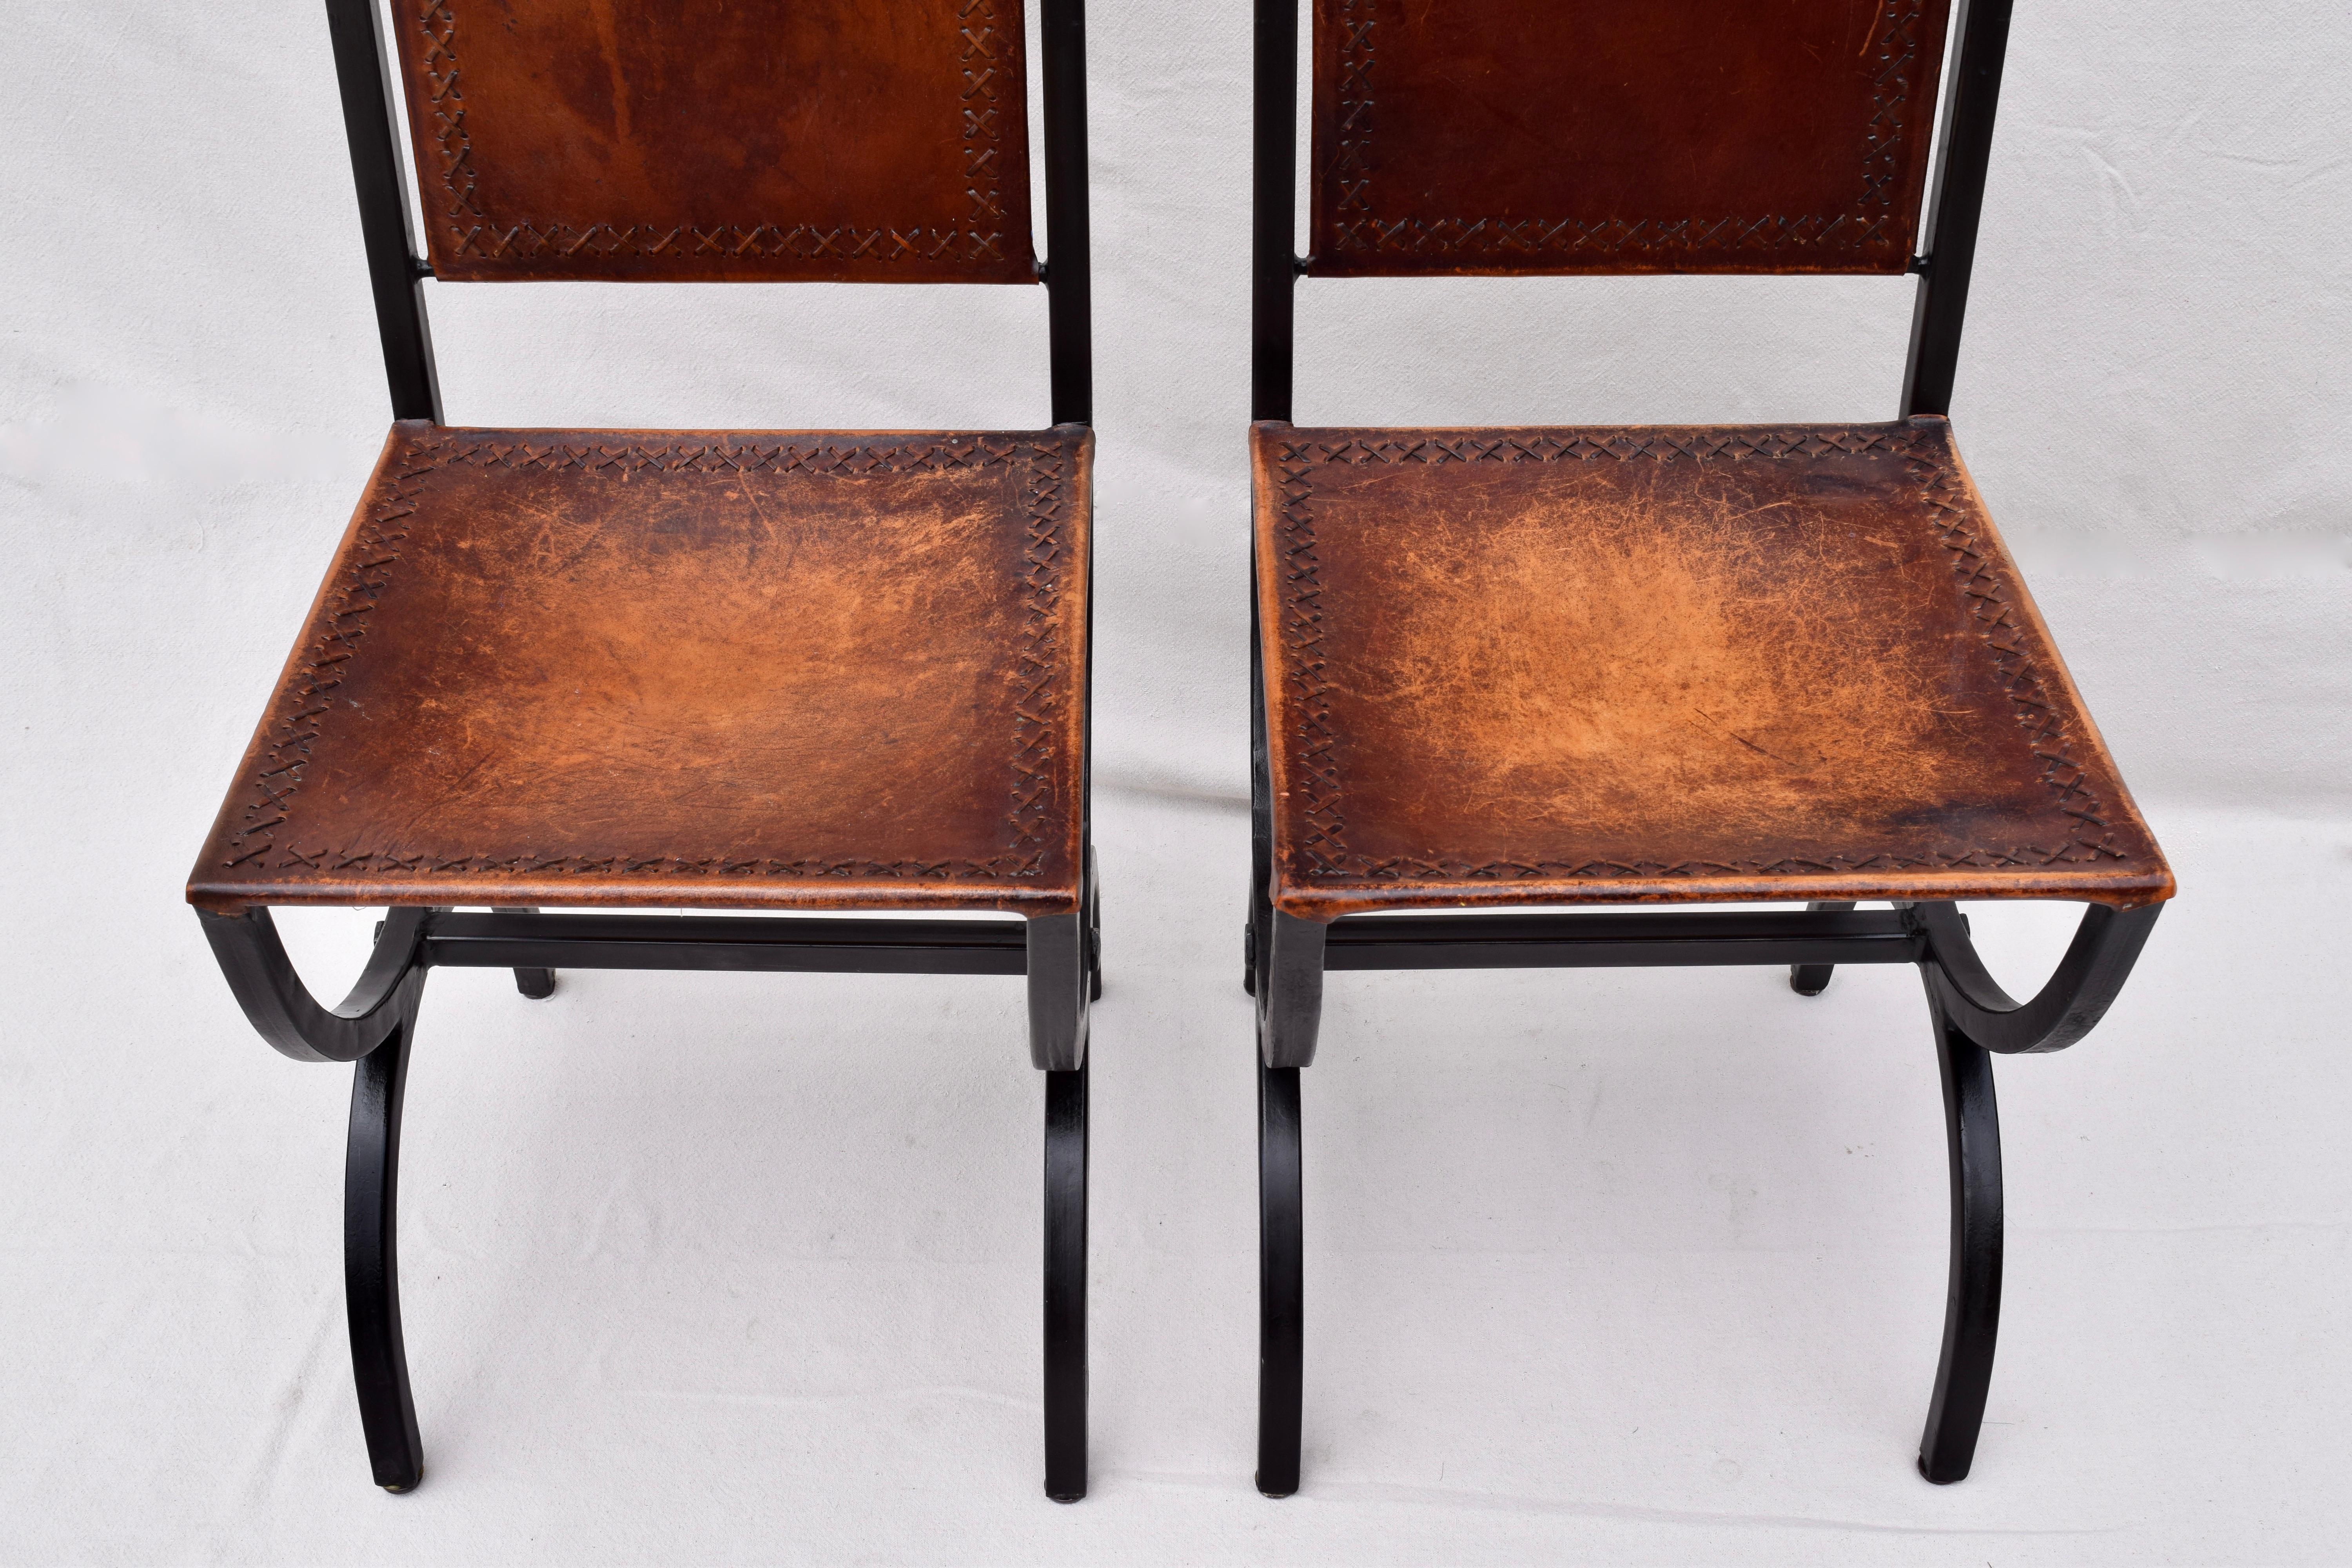 North American California NapaStyle Iron and Leather Curule Form Dining Chairs